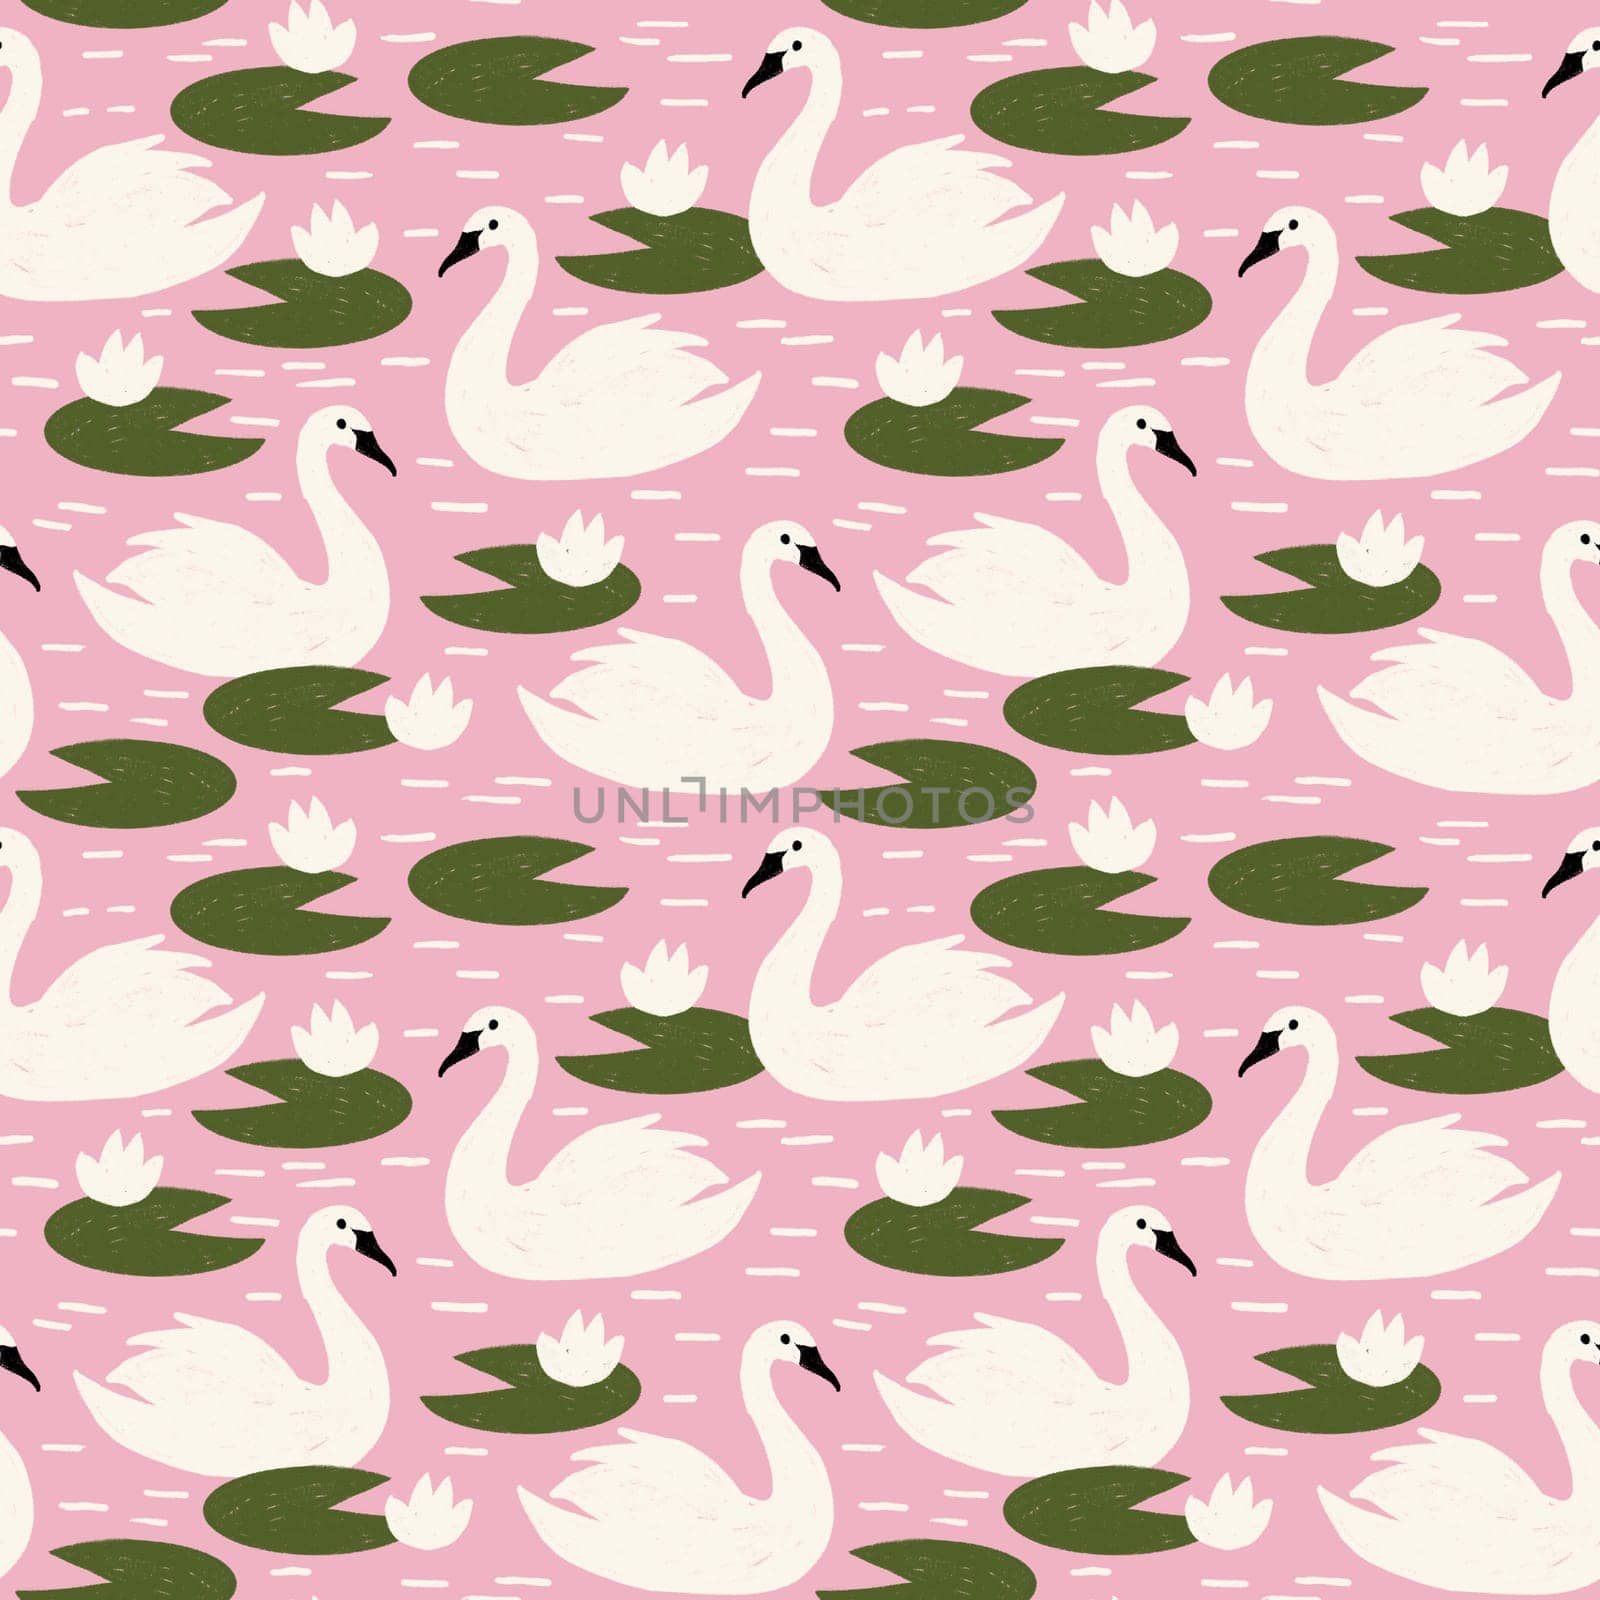 Hand drawn seamless pattern with white swans birds green water lily pond lake. Pink purple nature springtime summer garden, colorful kids nirsery children print, doodle crayon style wildlife